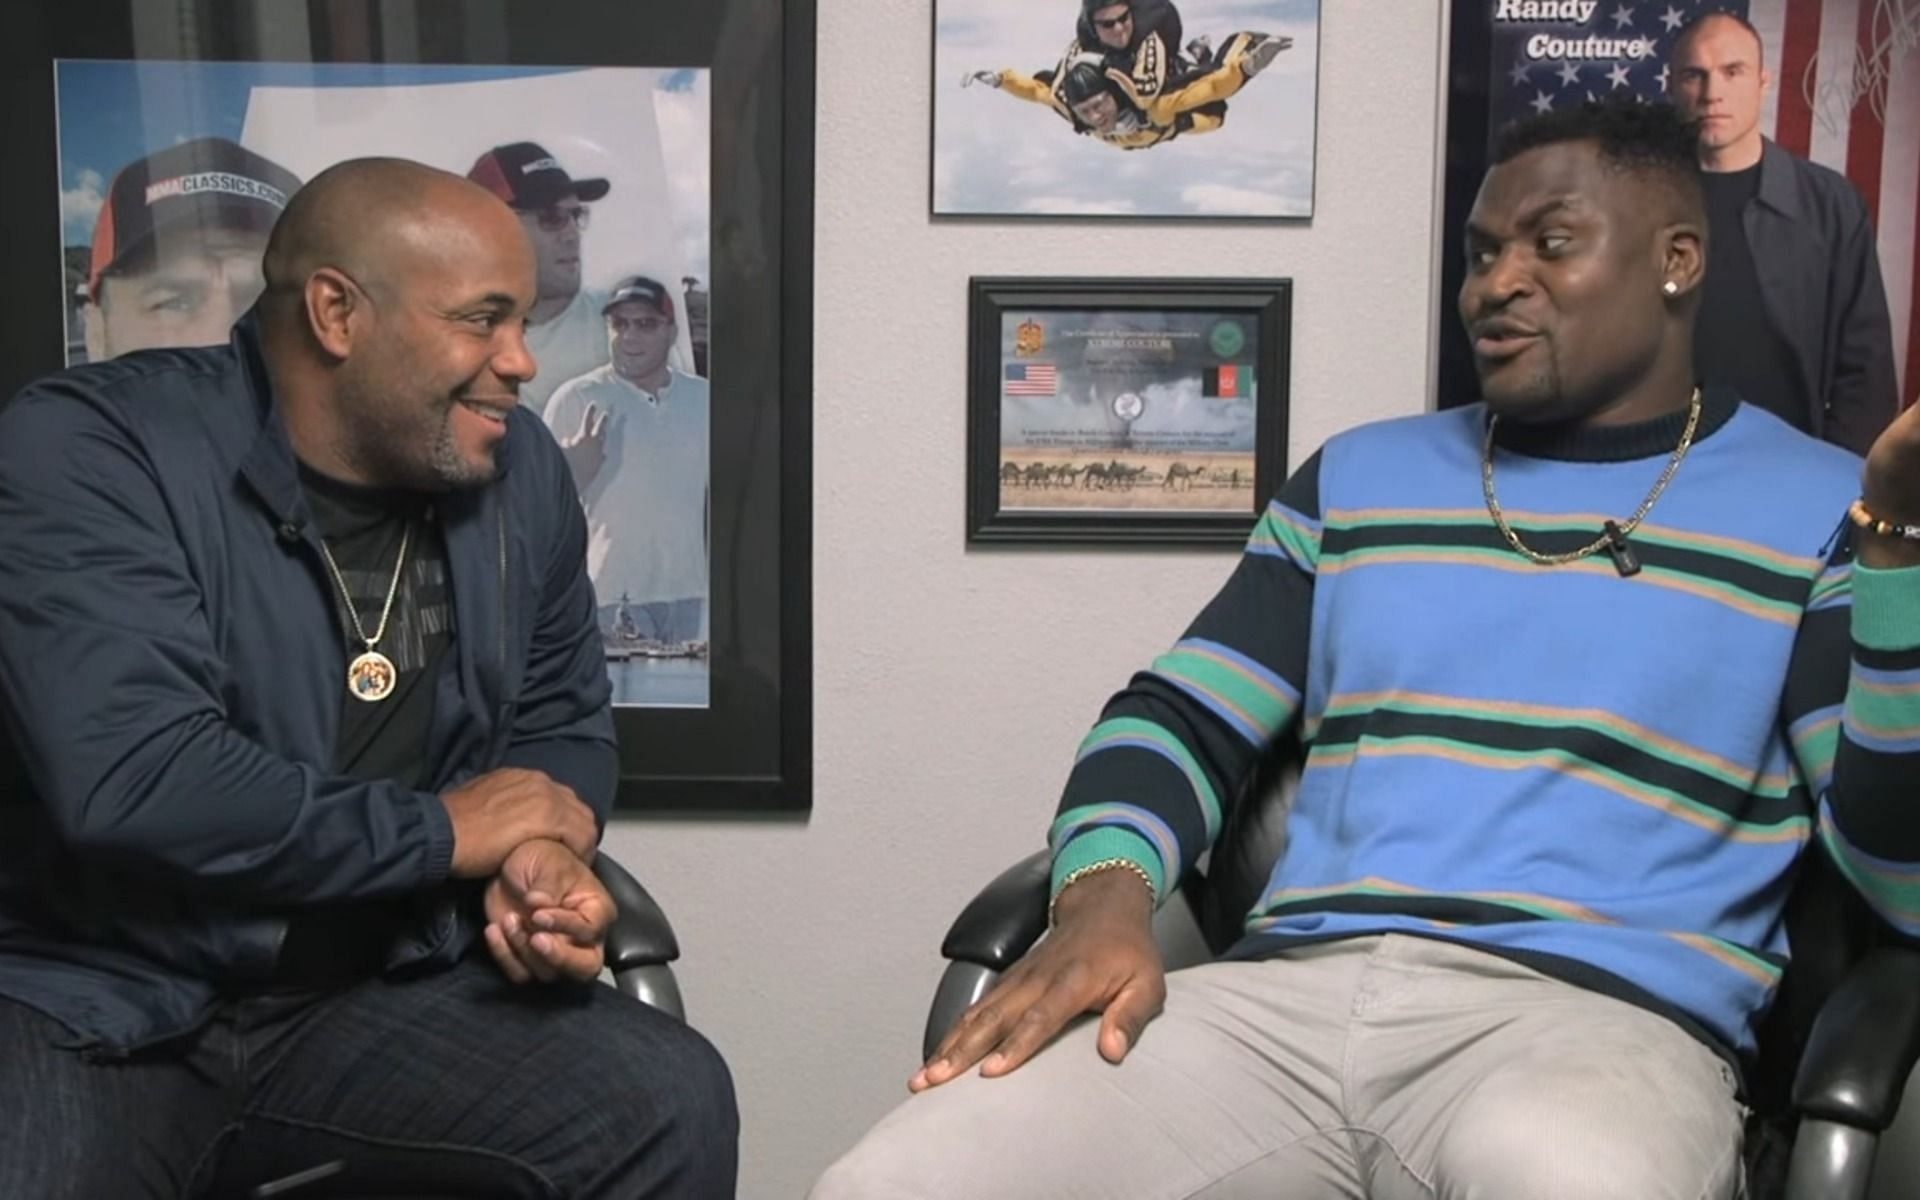 Former and current UFC heavyweight champions Daniel Cormier (left) and Francis Ngannou (right), respectively [Image Credit: screen grab from DC&#039;s official YouTube channel]